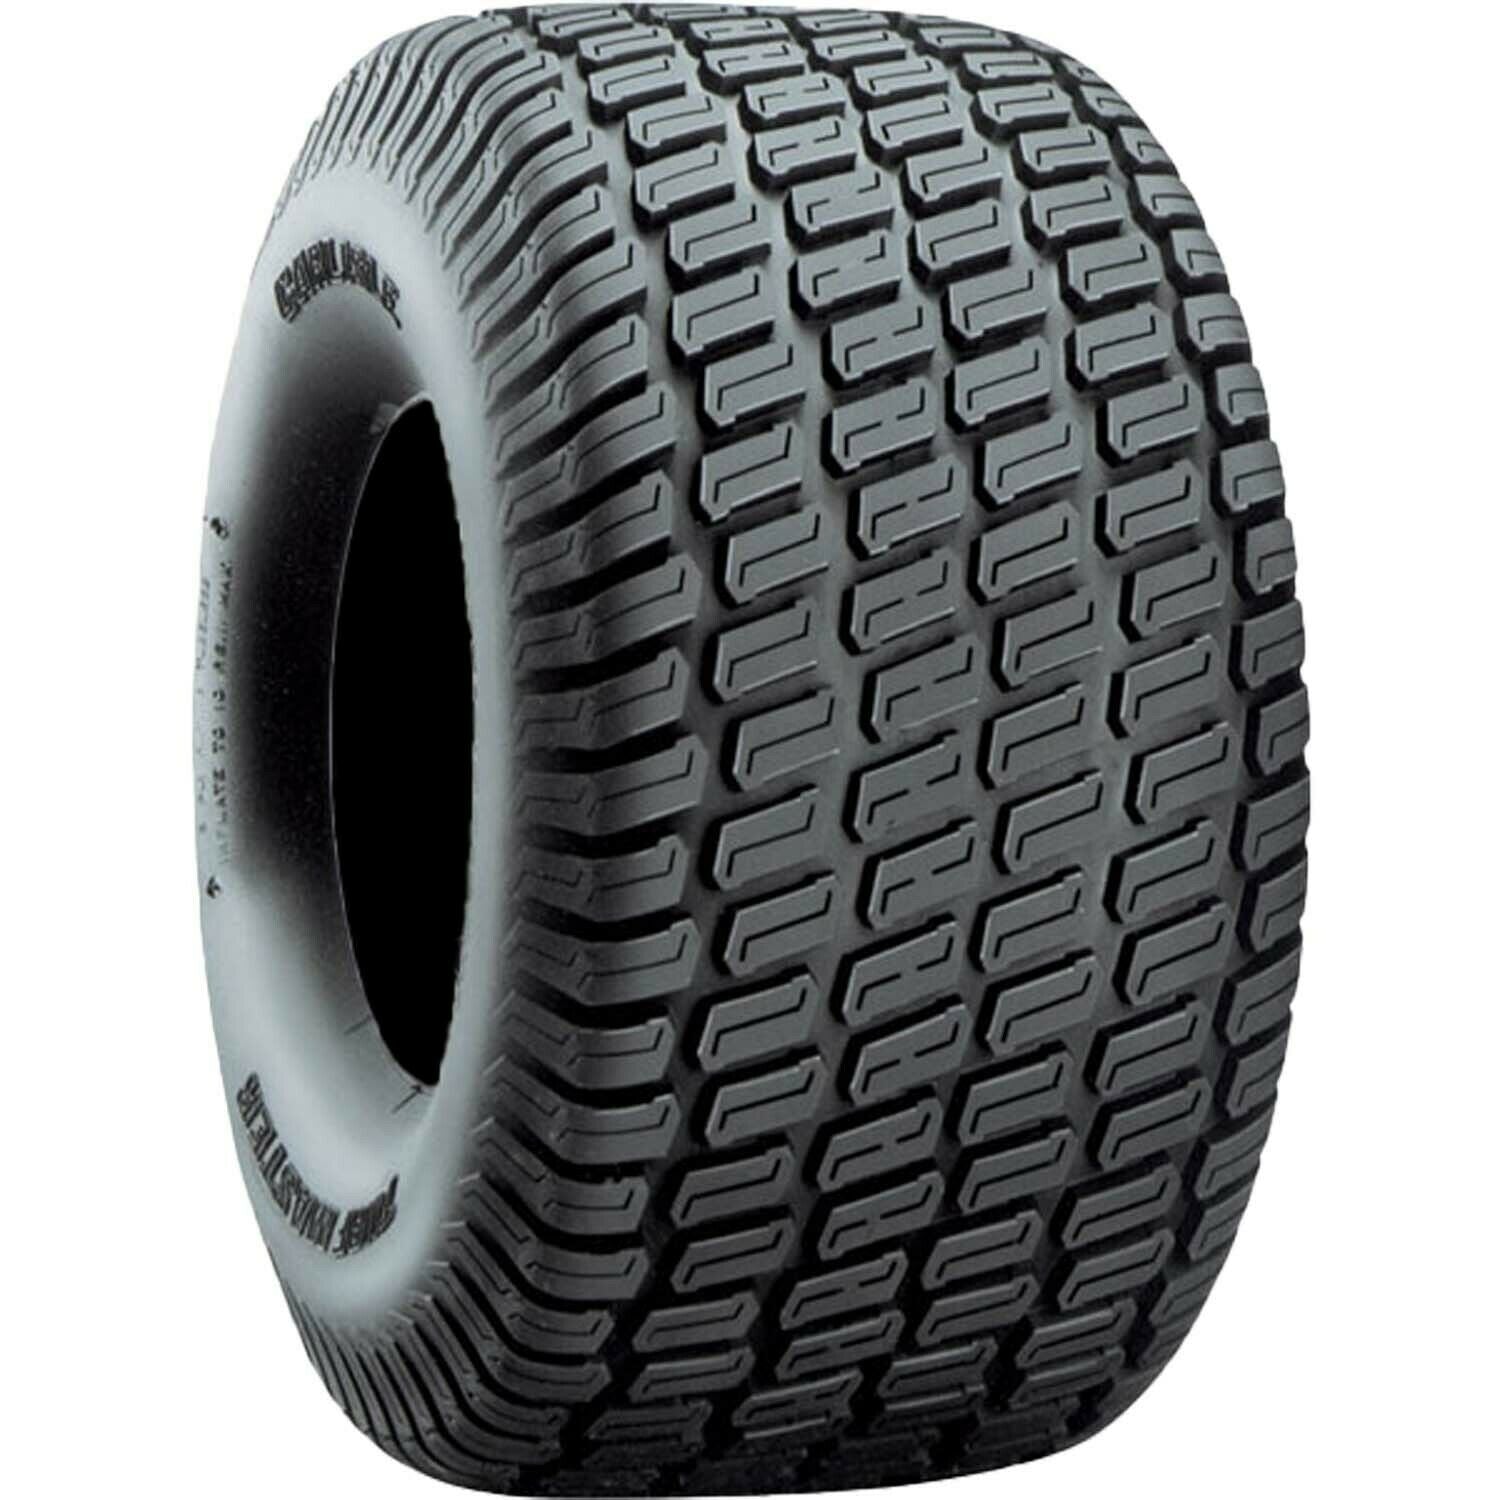 Carlisle Turf Master Lawn and Garden Tire 4Ply 23x10.50-12